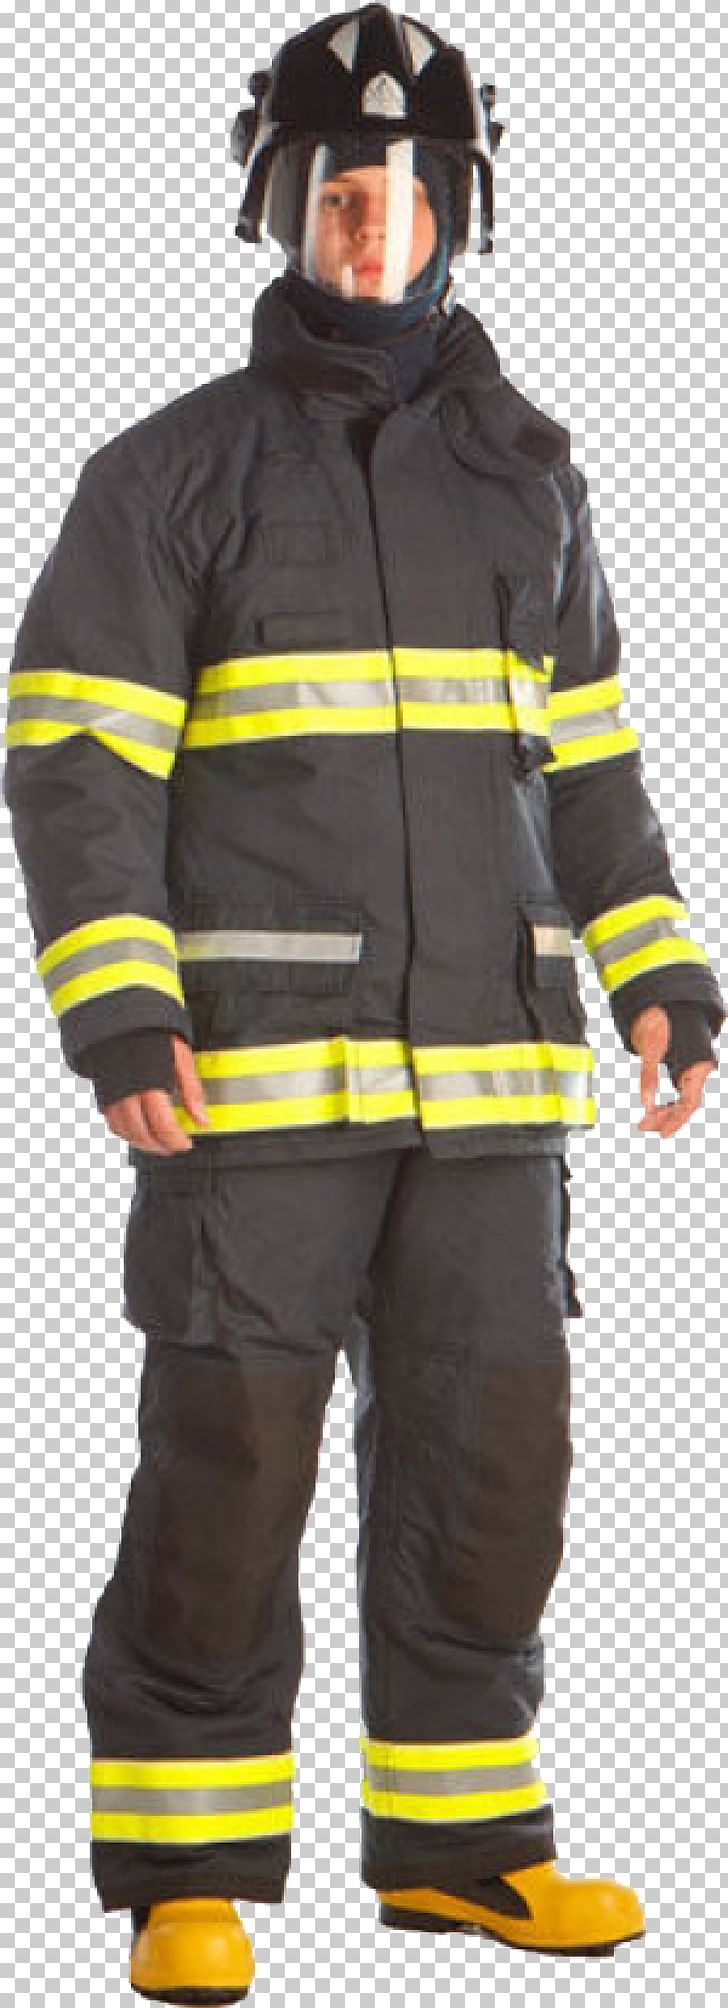 Firefighter PNG, Clipart, Firefighter Free PNG Download